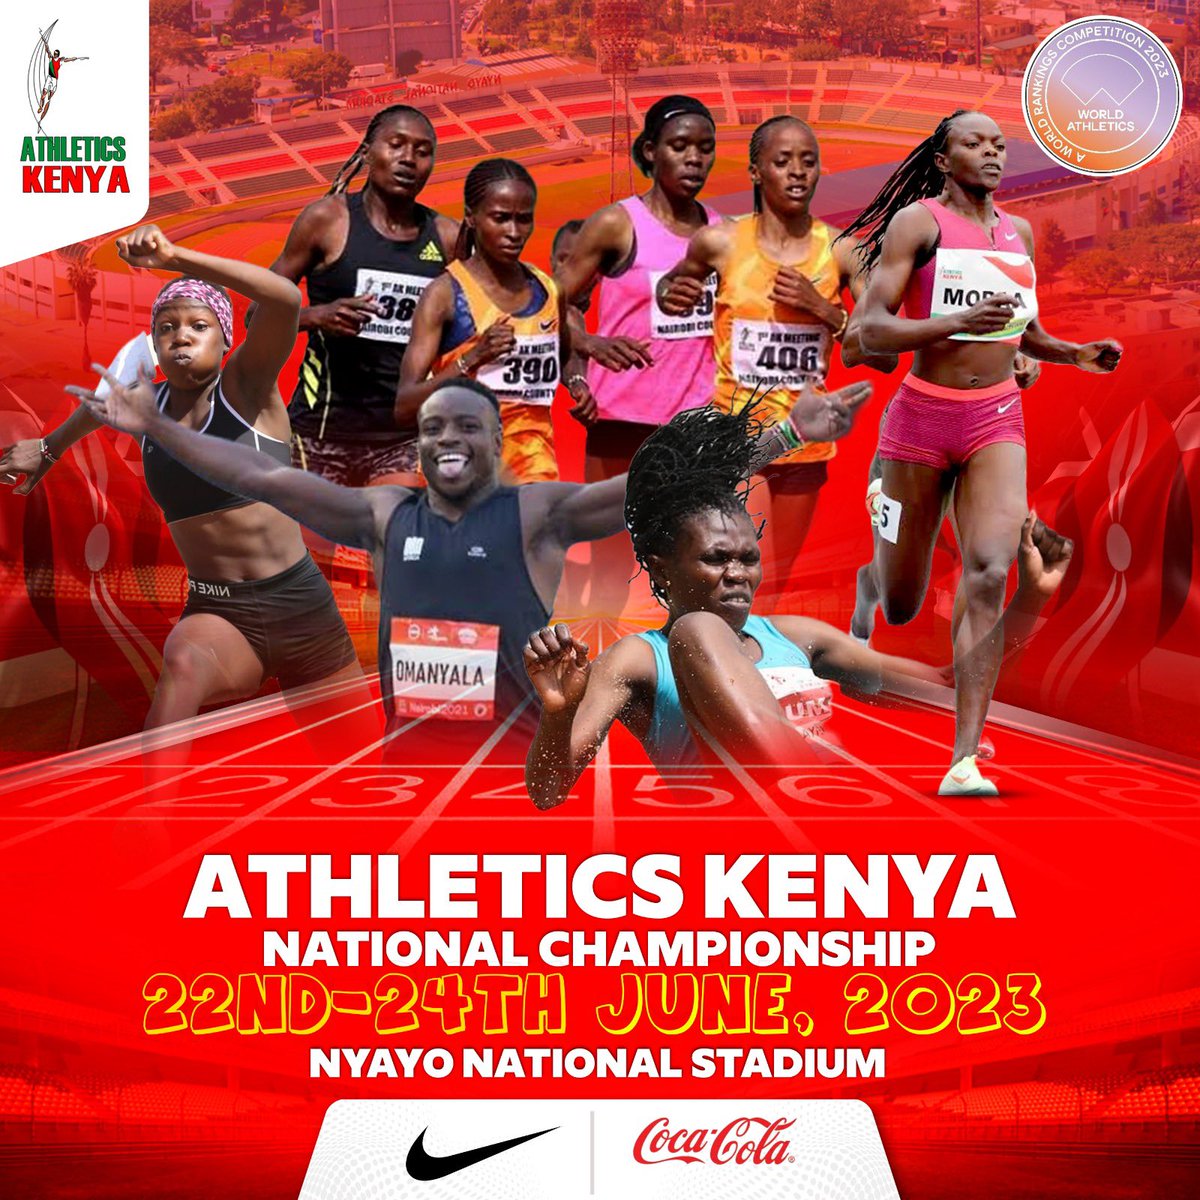 Day 2. #AKNationalChampionship it is getting 🔥🔥, into more semis today. Thrilling moment is 10,000M   Finals both Men & Women that will take place today. 

Cc @athletics_kenya @KorirOfficial